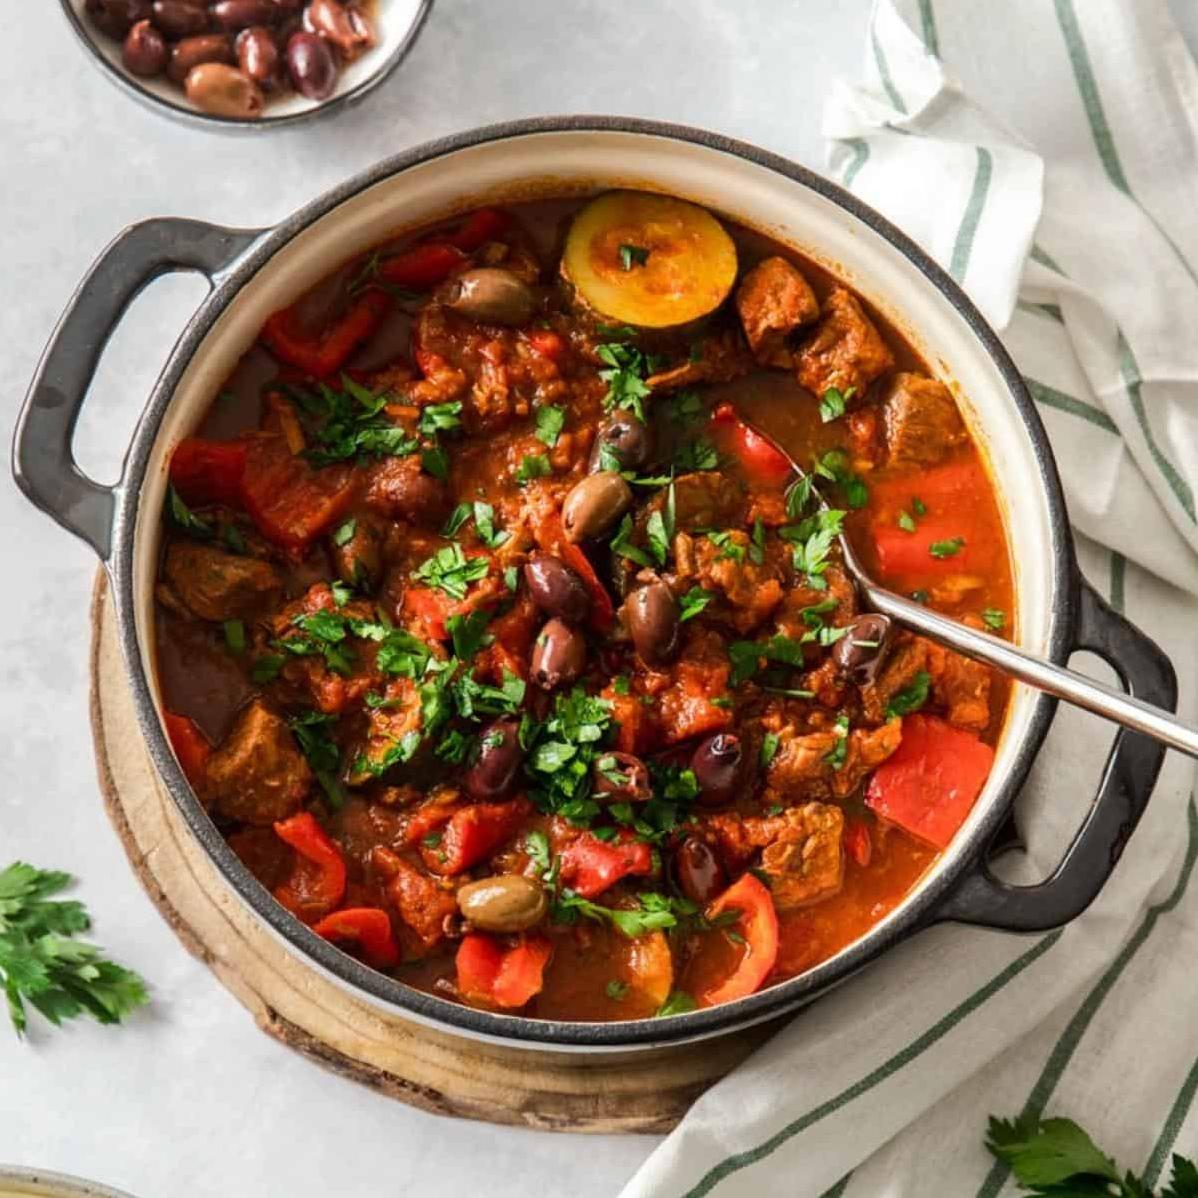  A warm and hearty stew to satisfy your cravings.